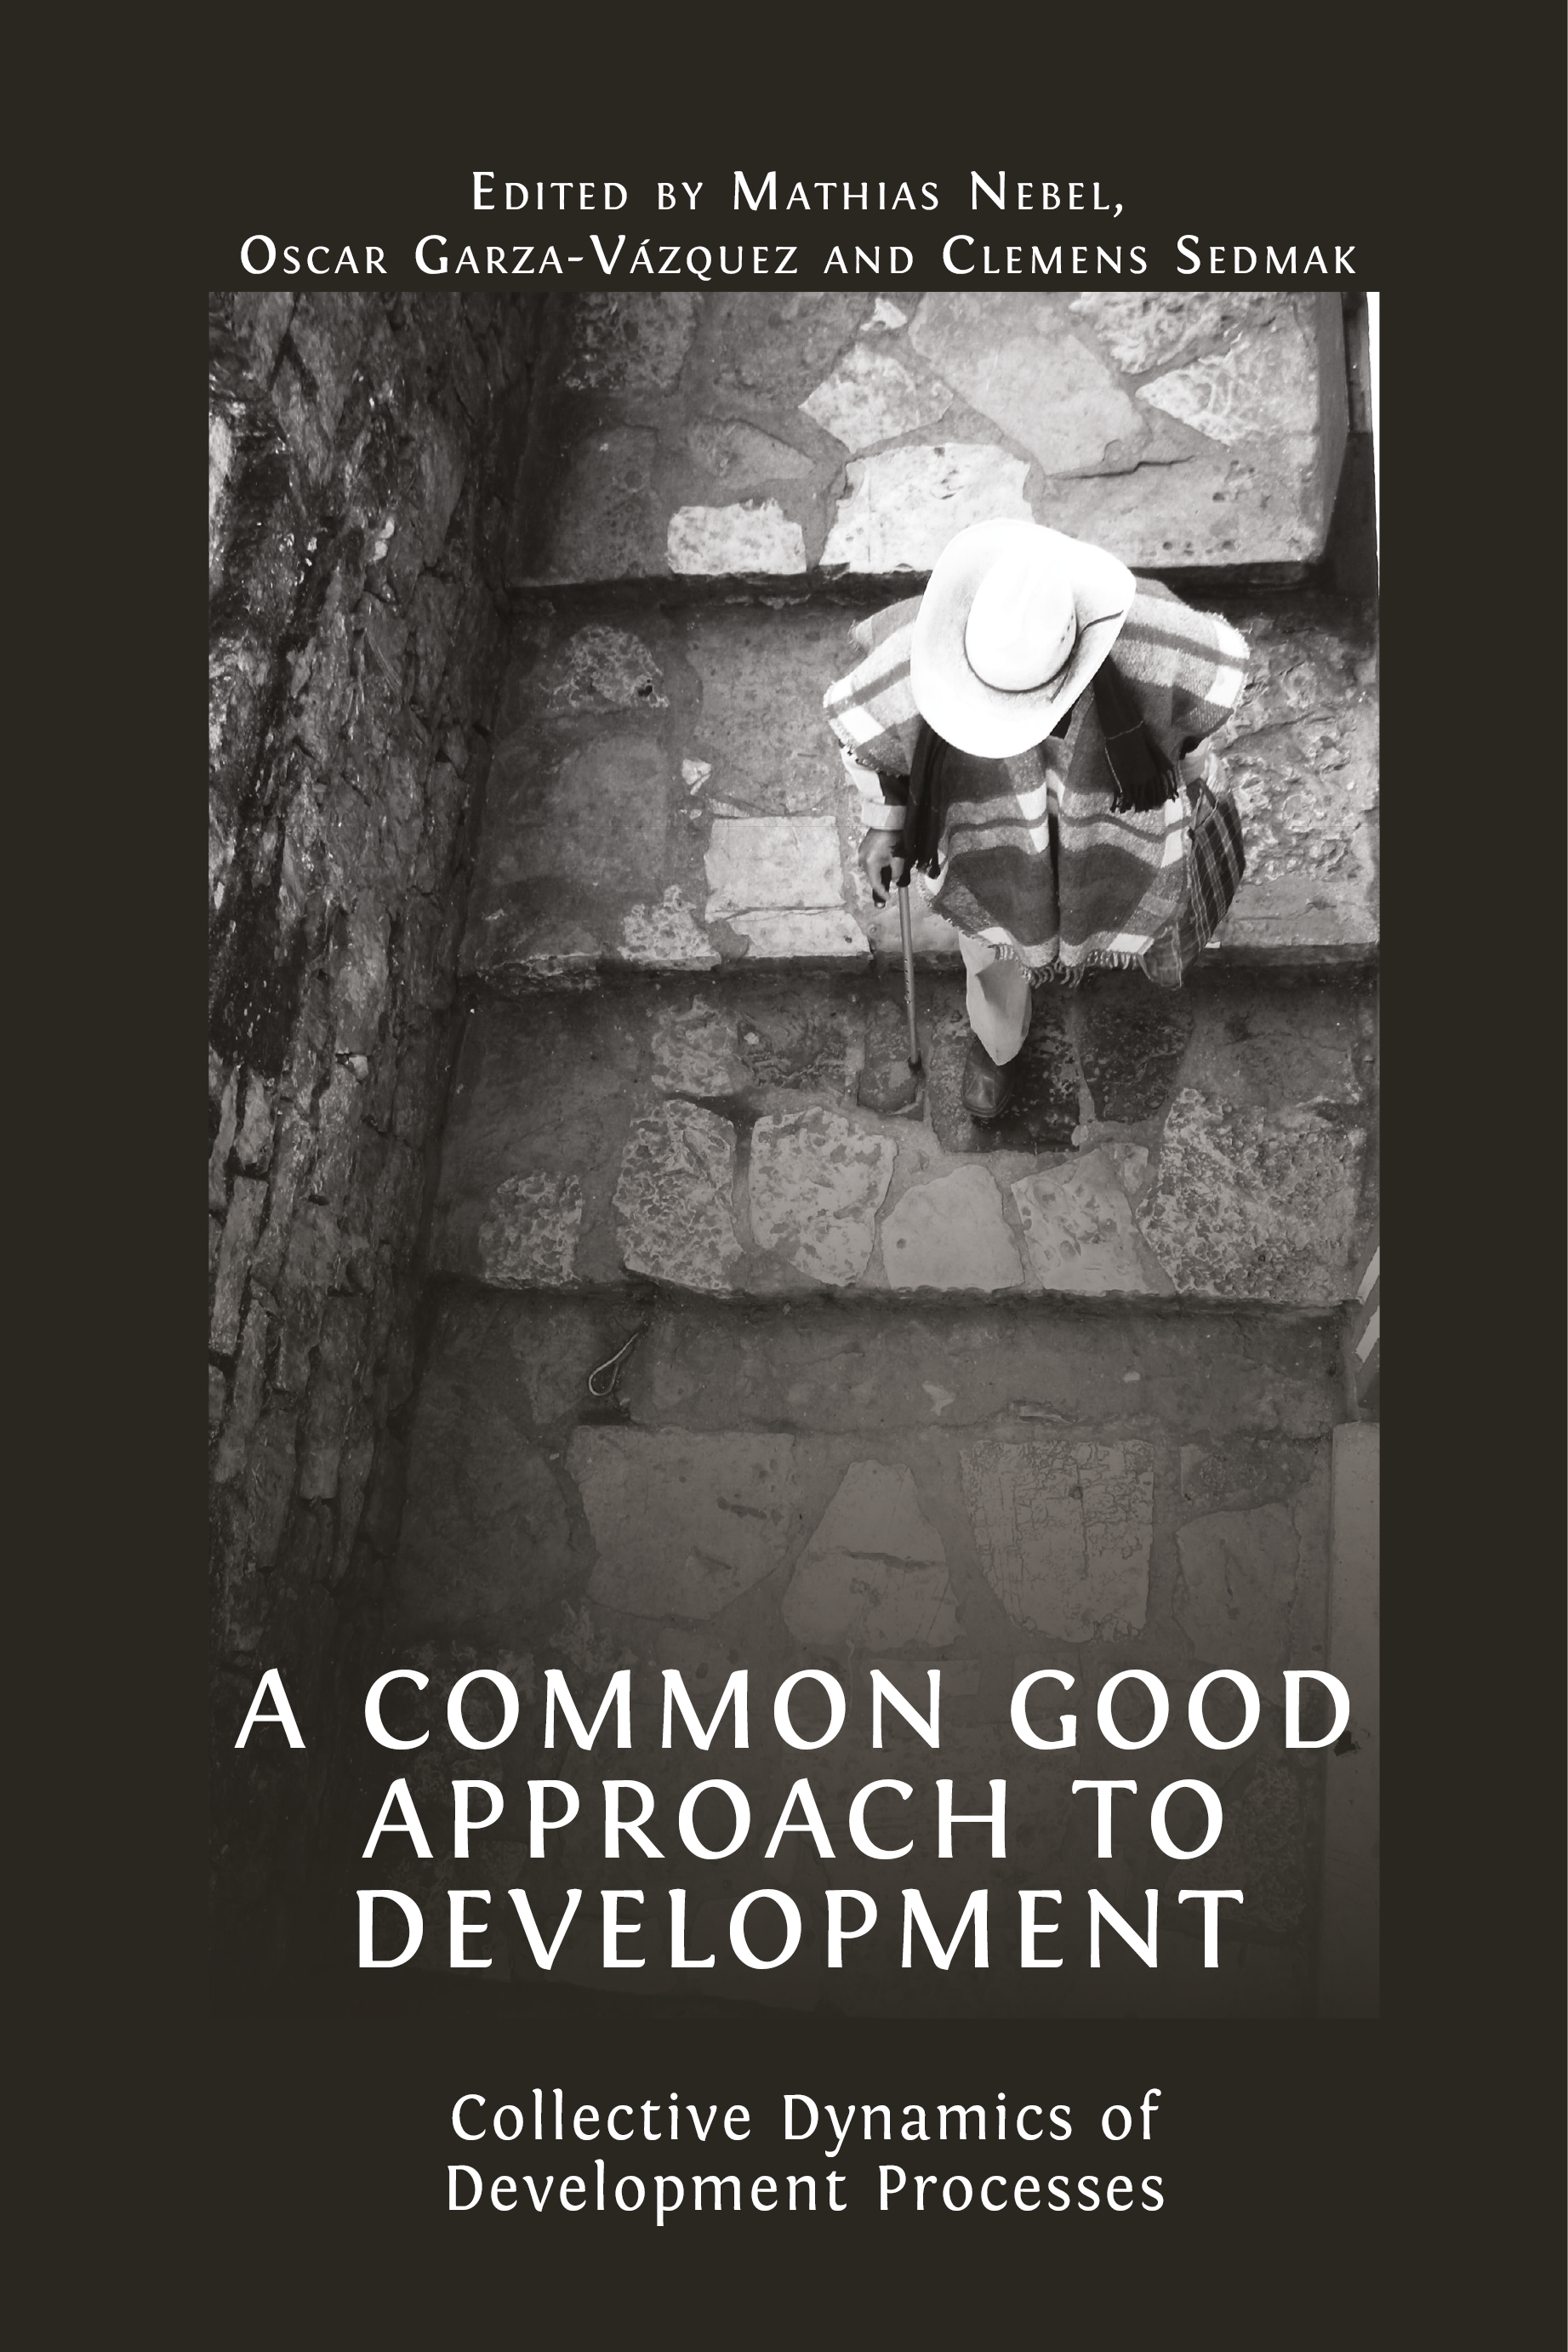 A Common Good Approach to Development book cover image